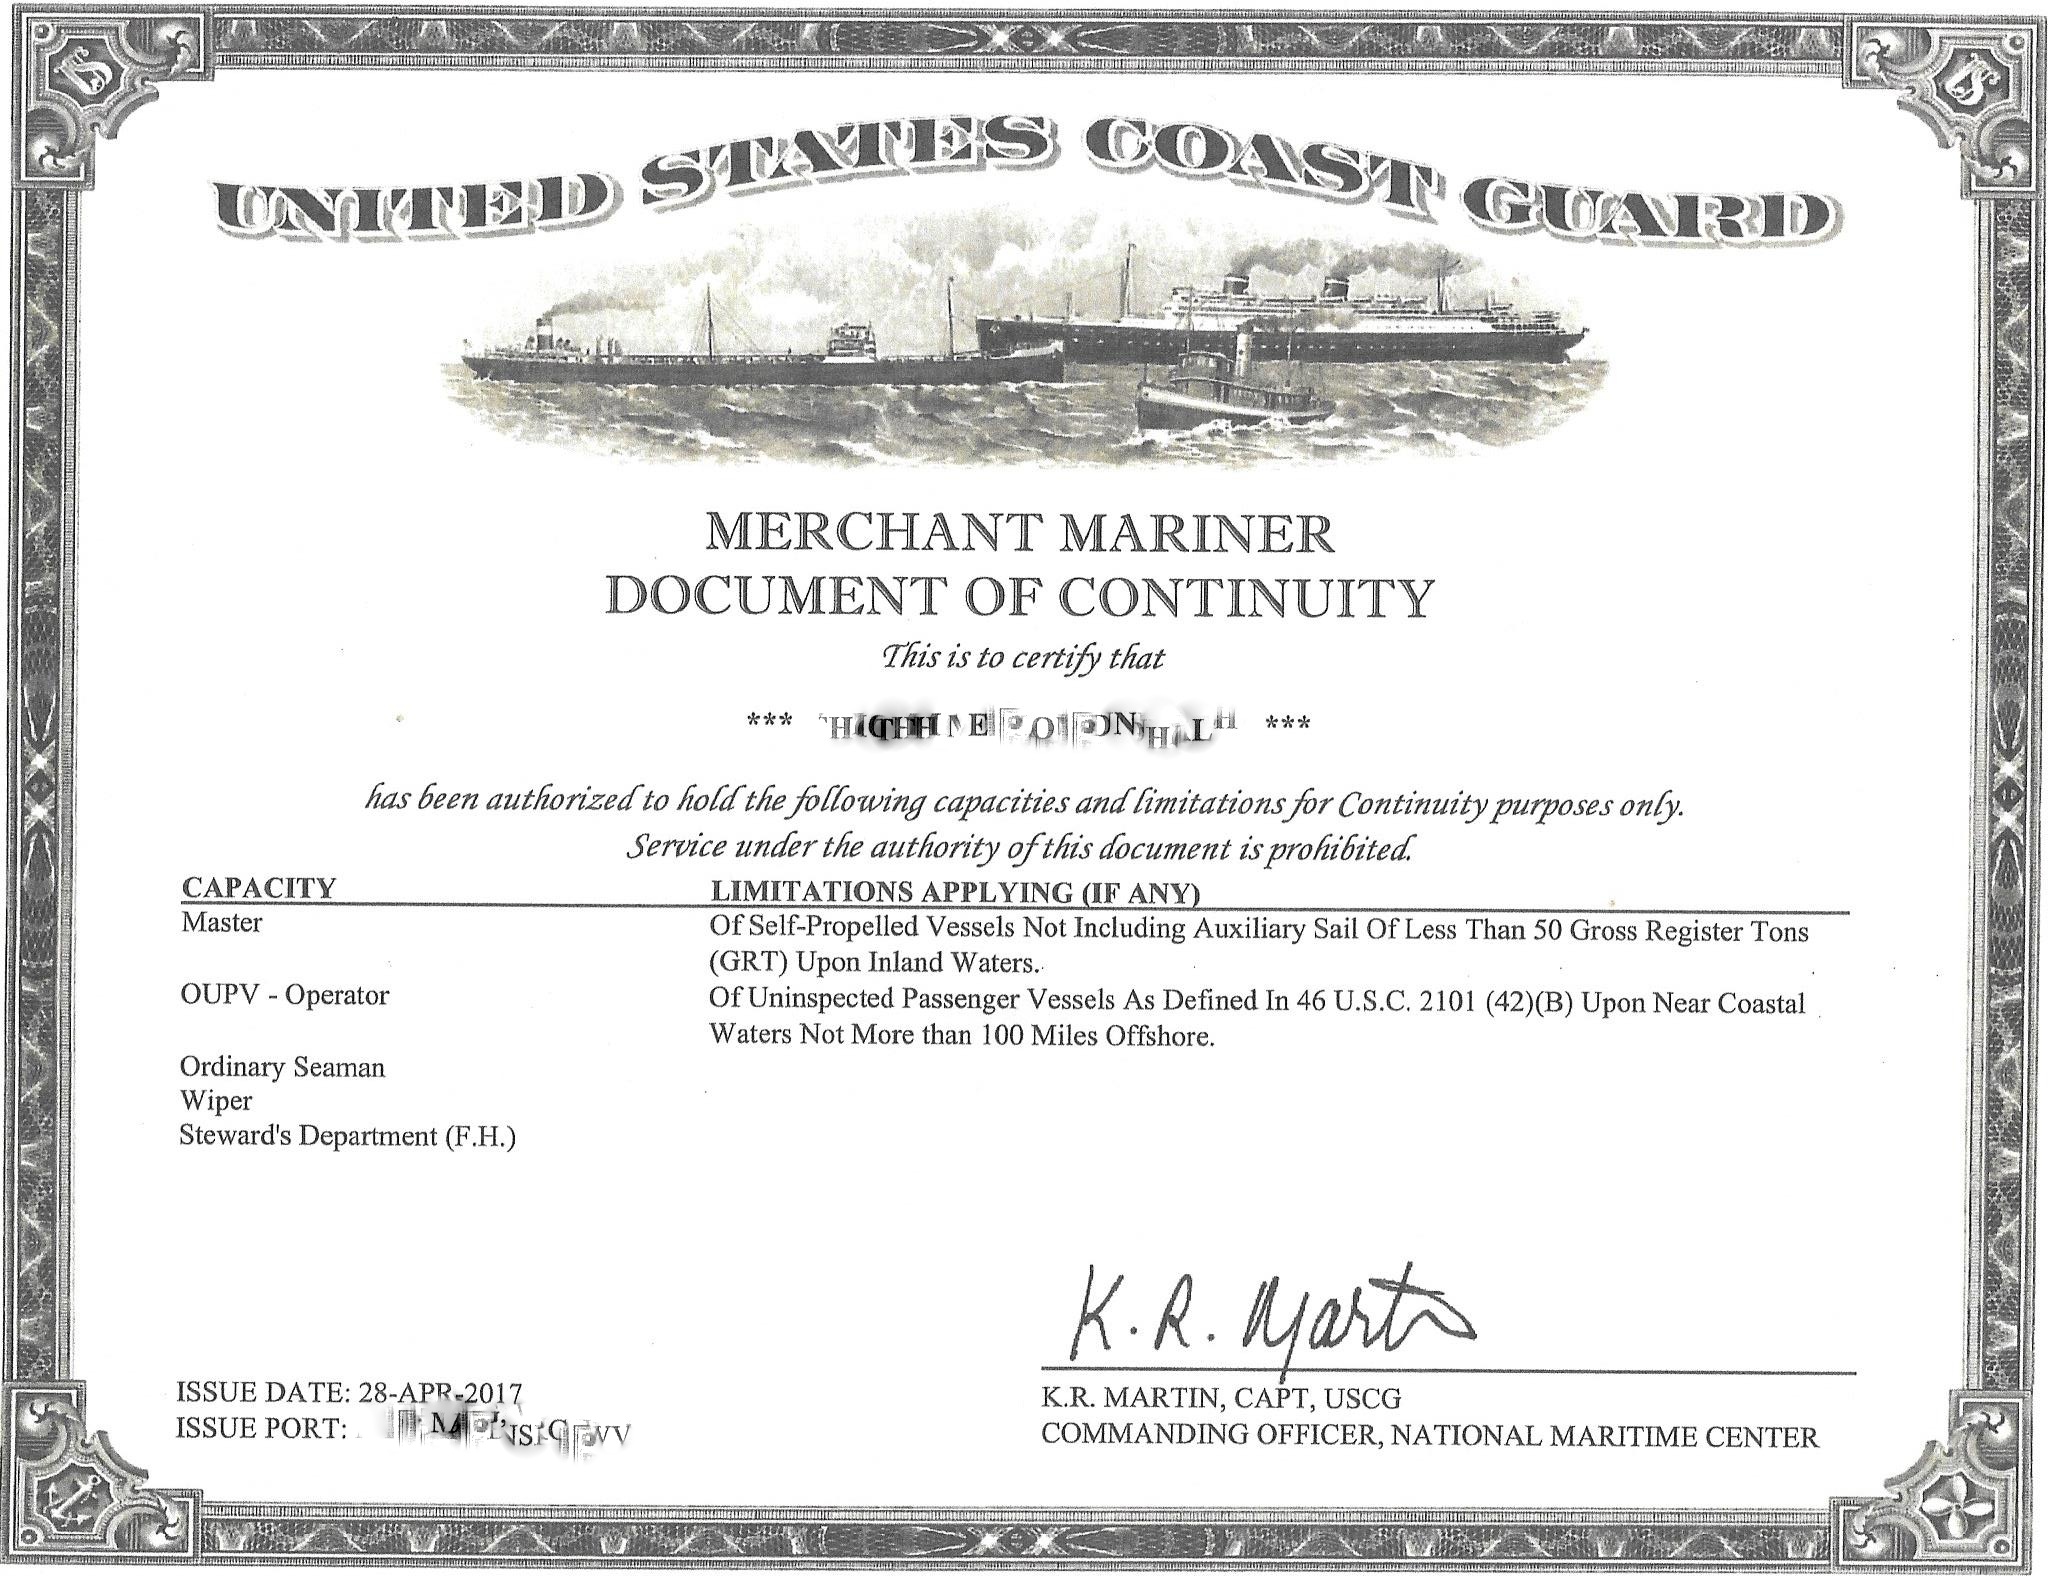 USCG Document of Continuity